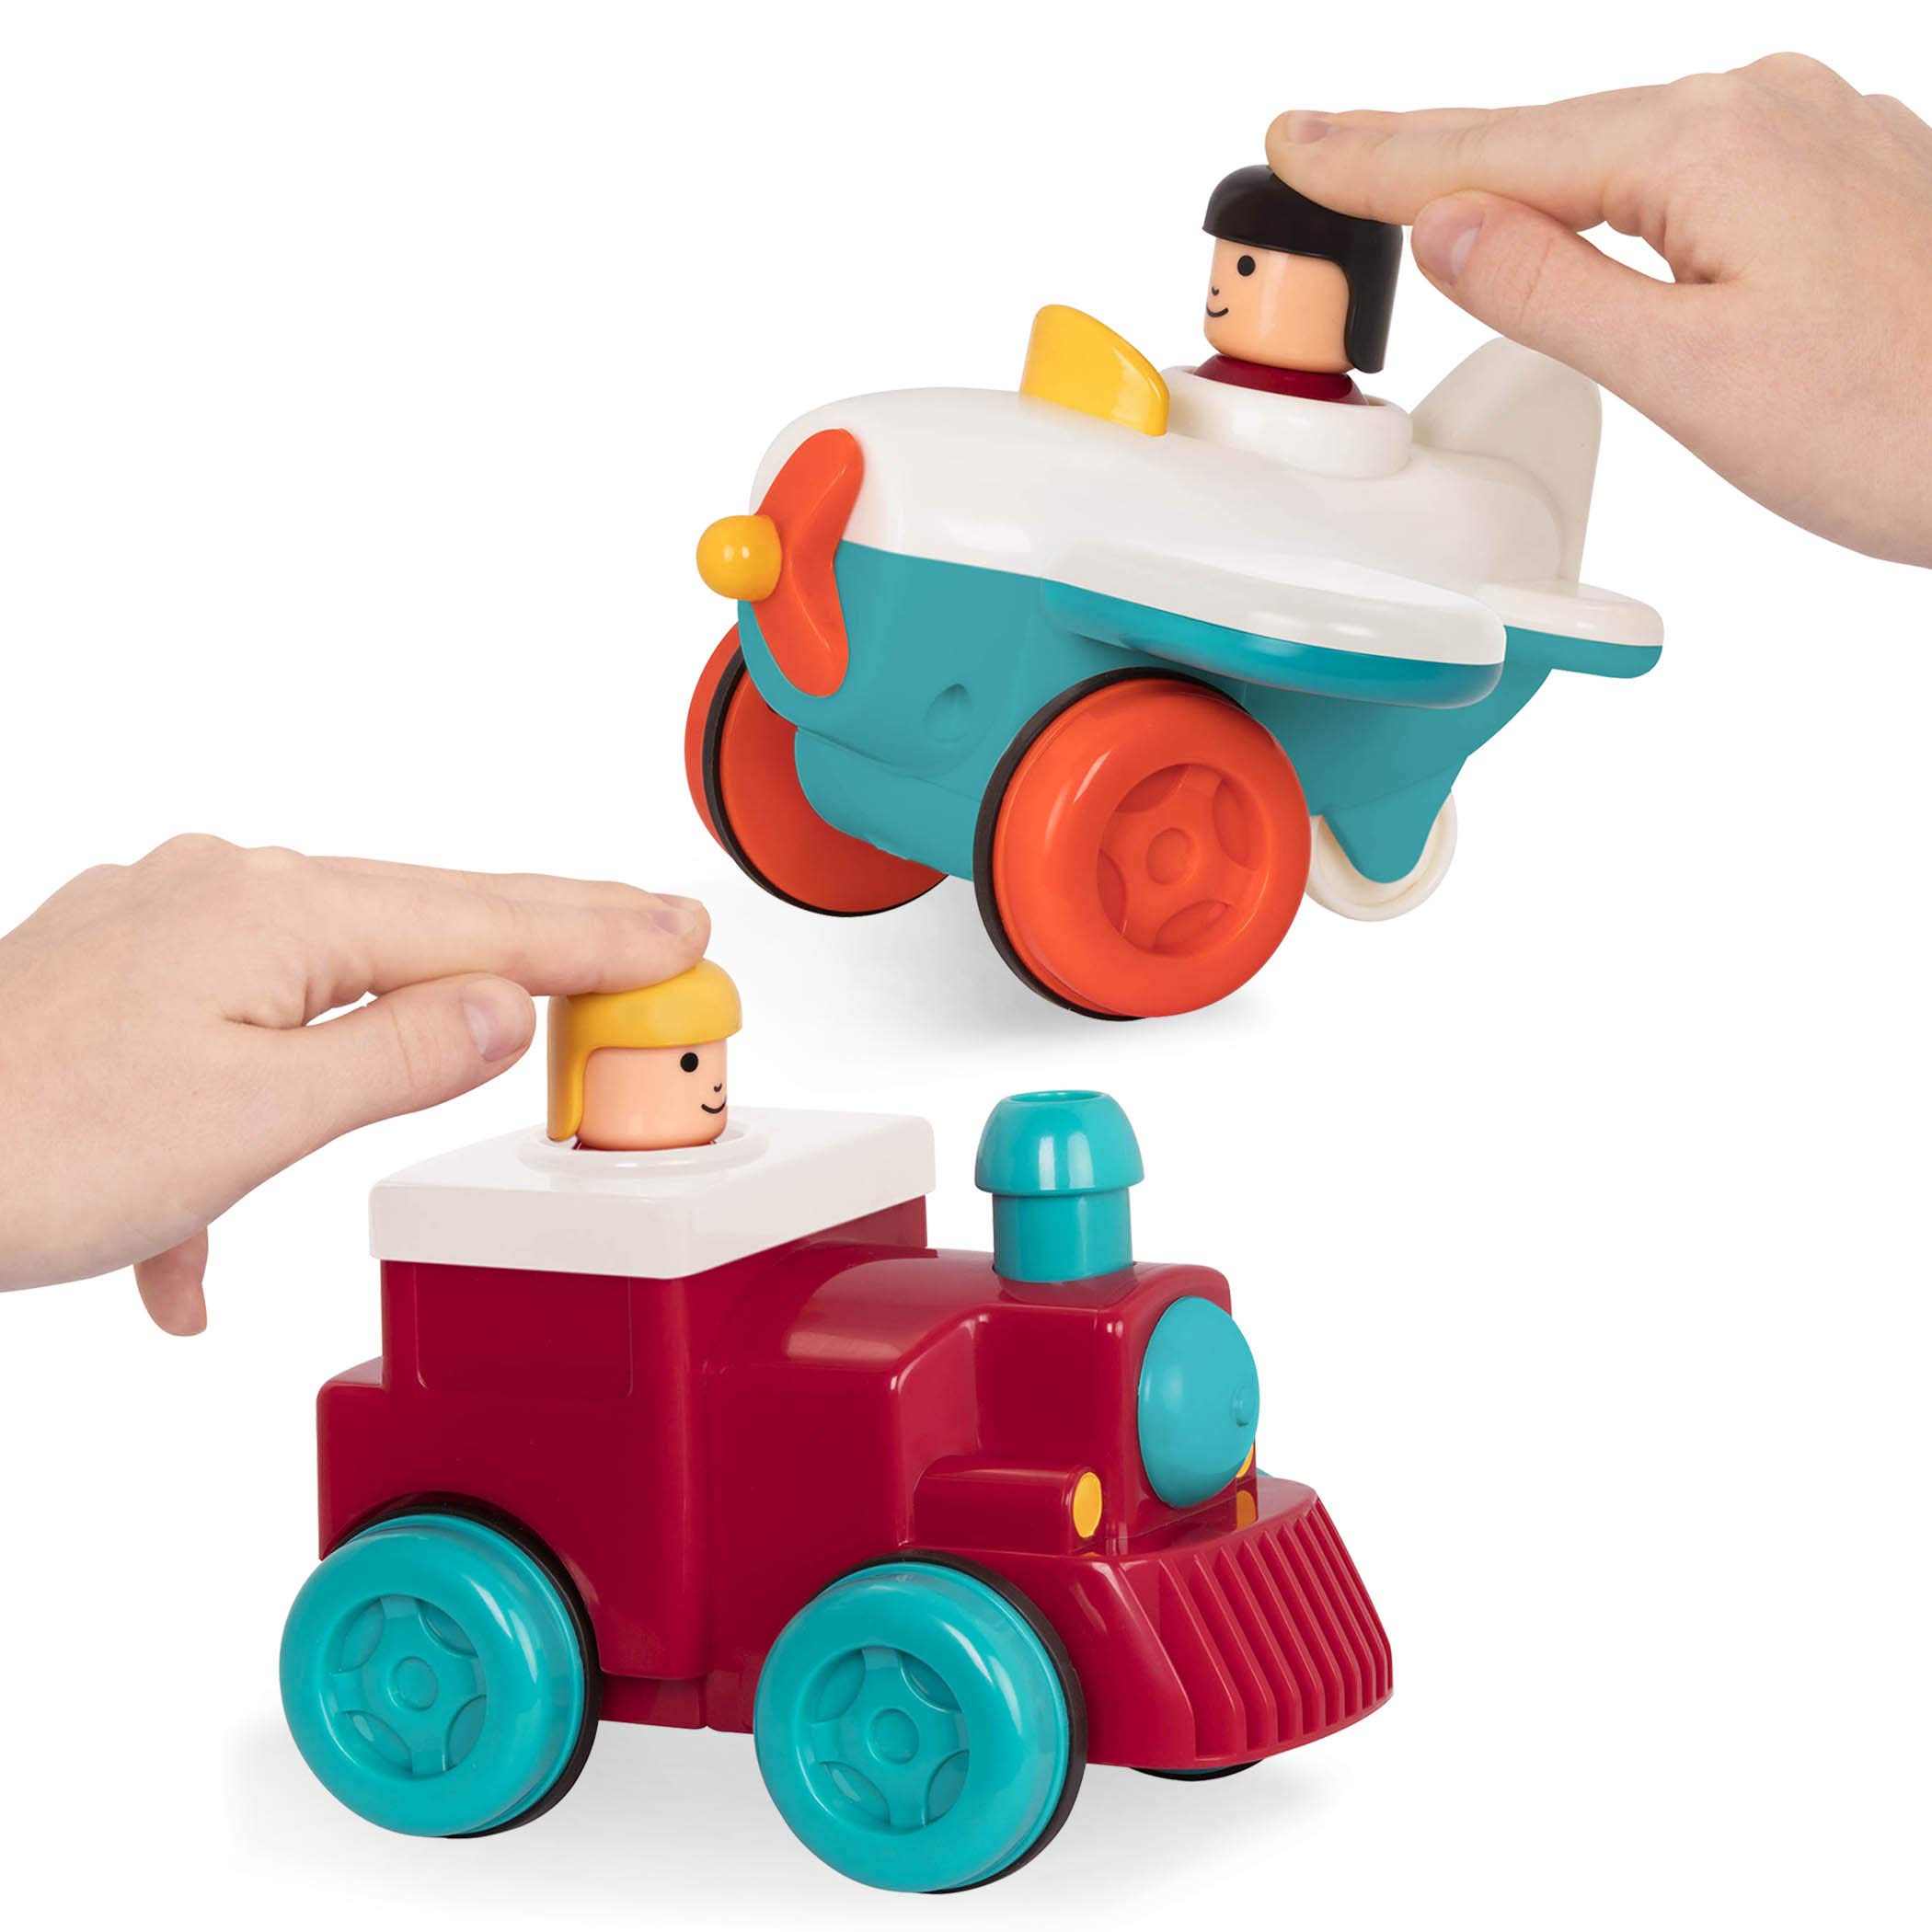 Battat – Push and Go Vehicles – Friction Powered Pull-back Cars for Kids 18 Months + (Plane + Train Combo)